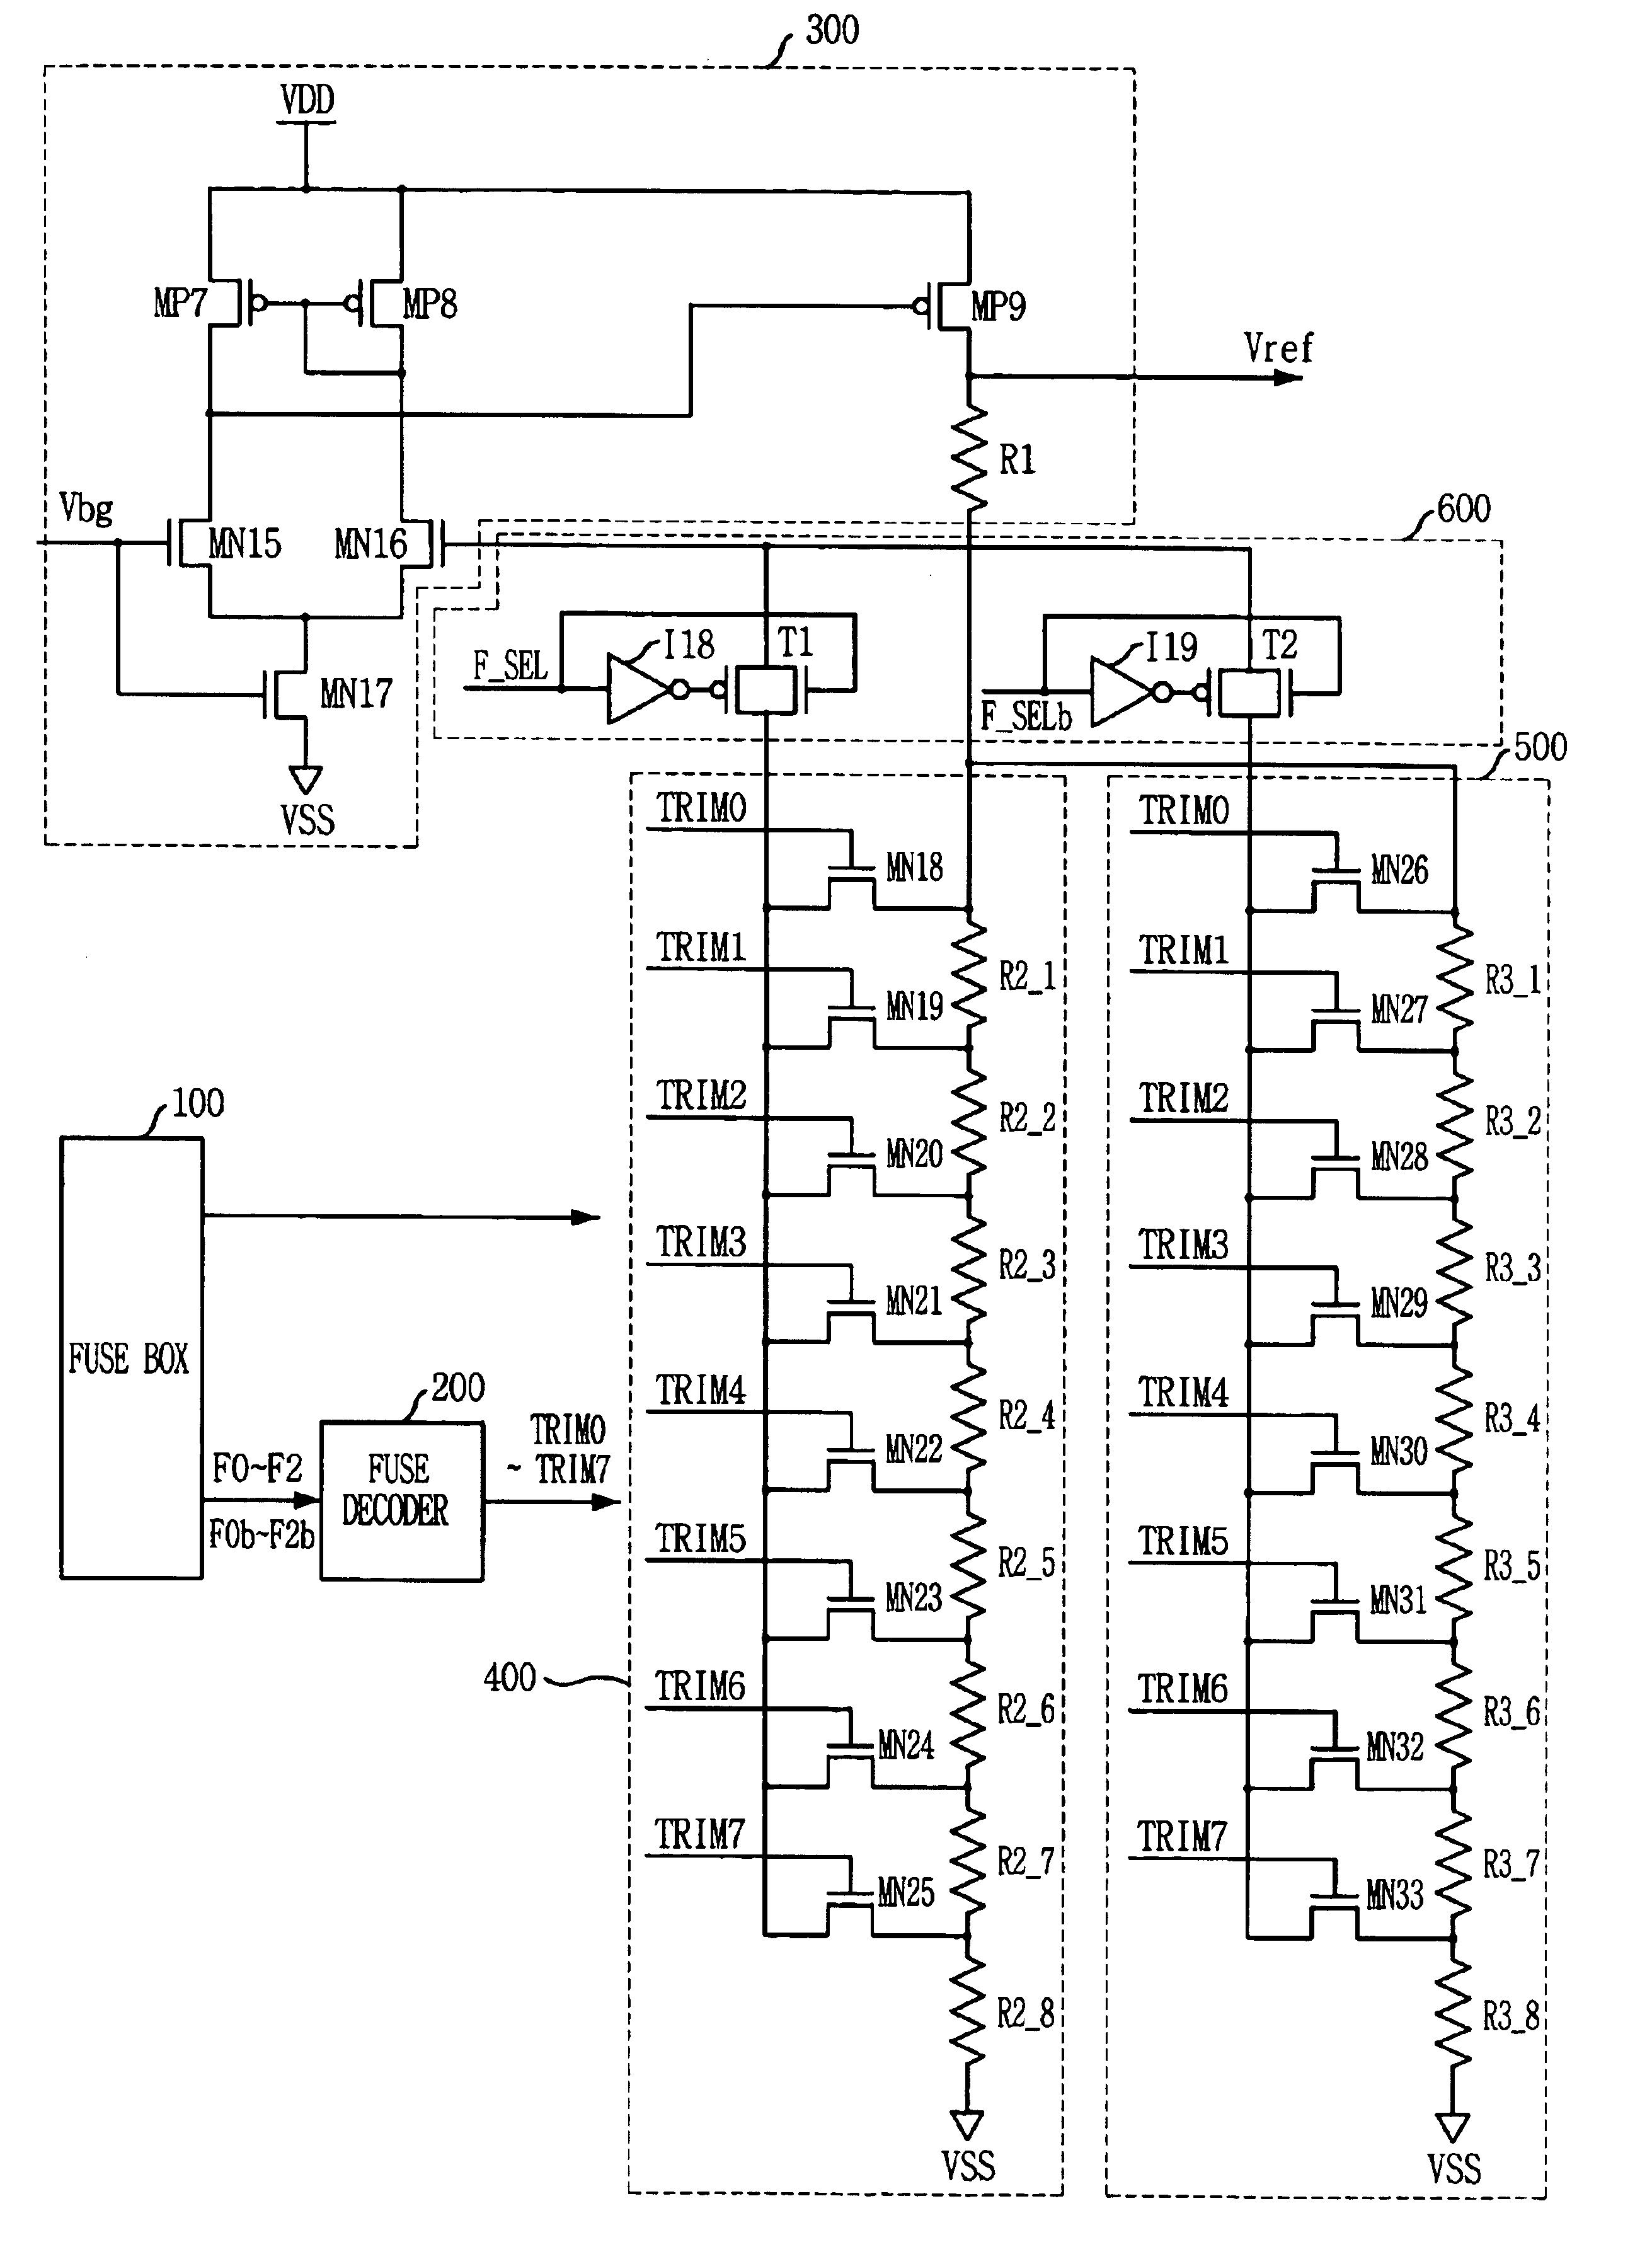 Reference voltage generating circuit for outputting multi-level reference voltage using fuse trimming